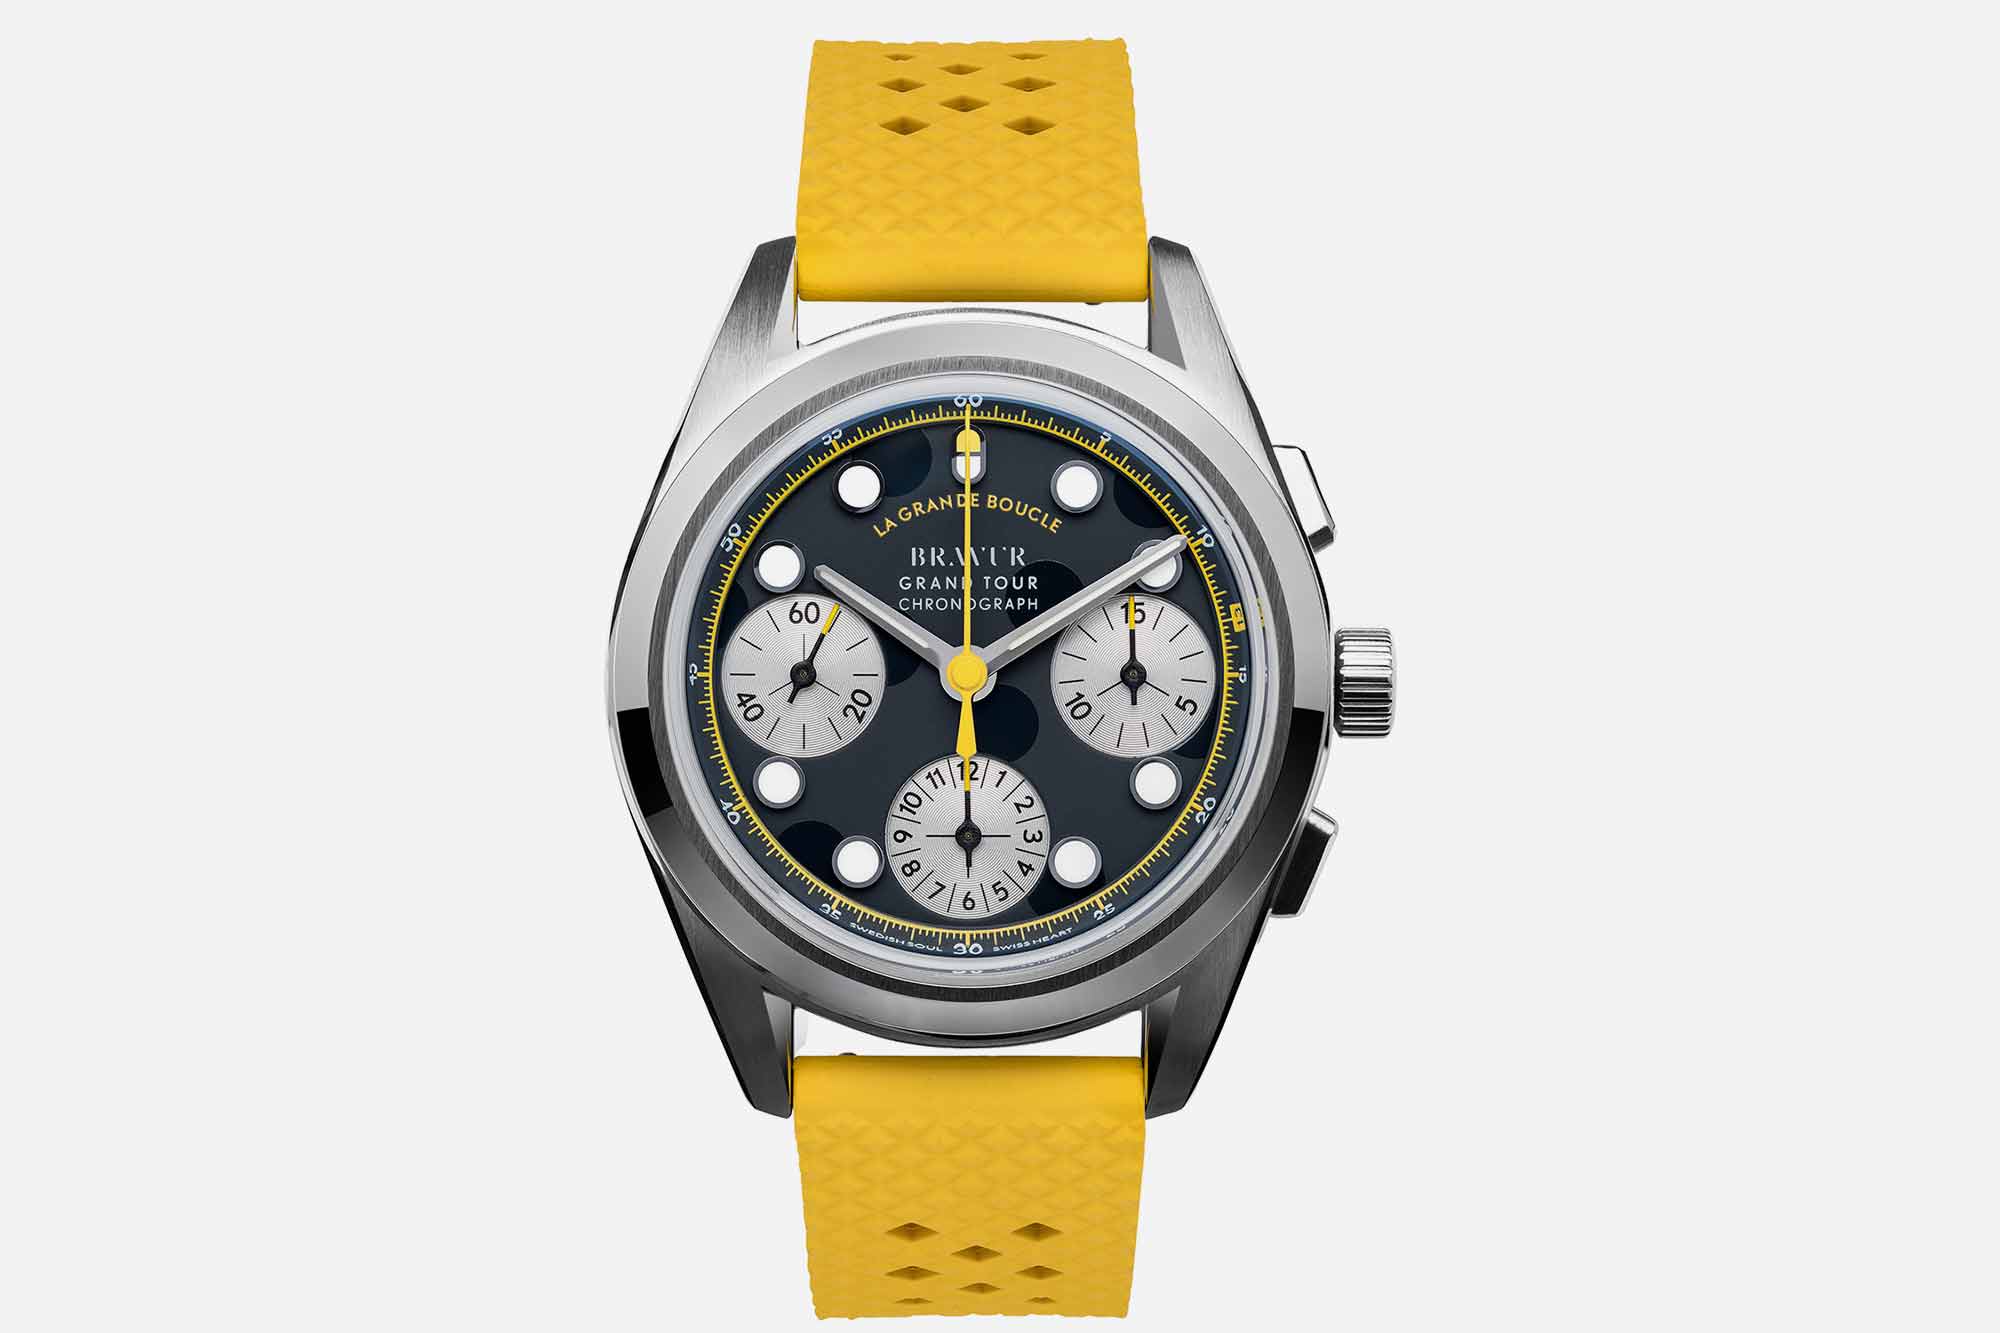 Bravur Continues their Grand Tour Series with the New La Grand Boucle Limited Edition